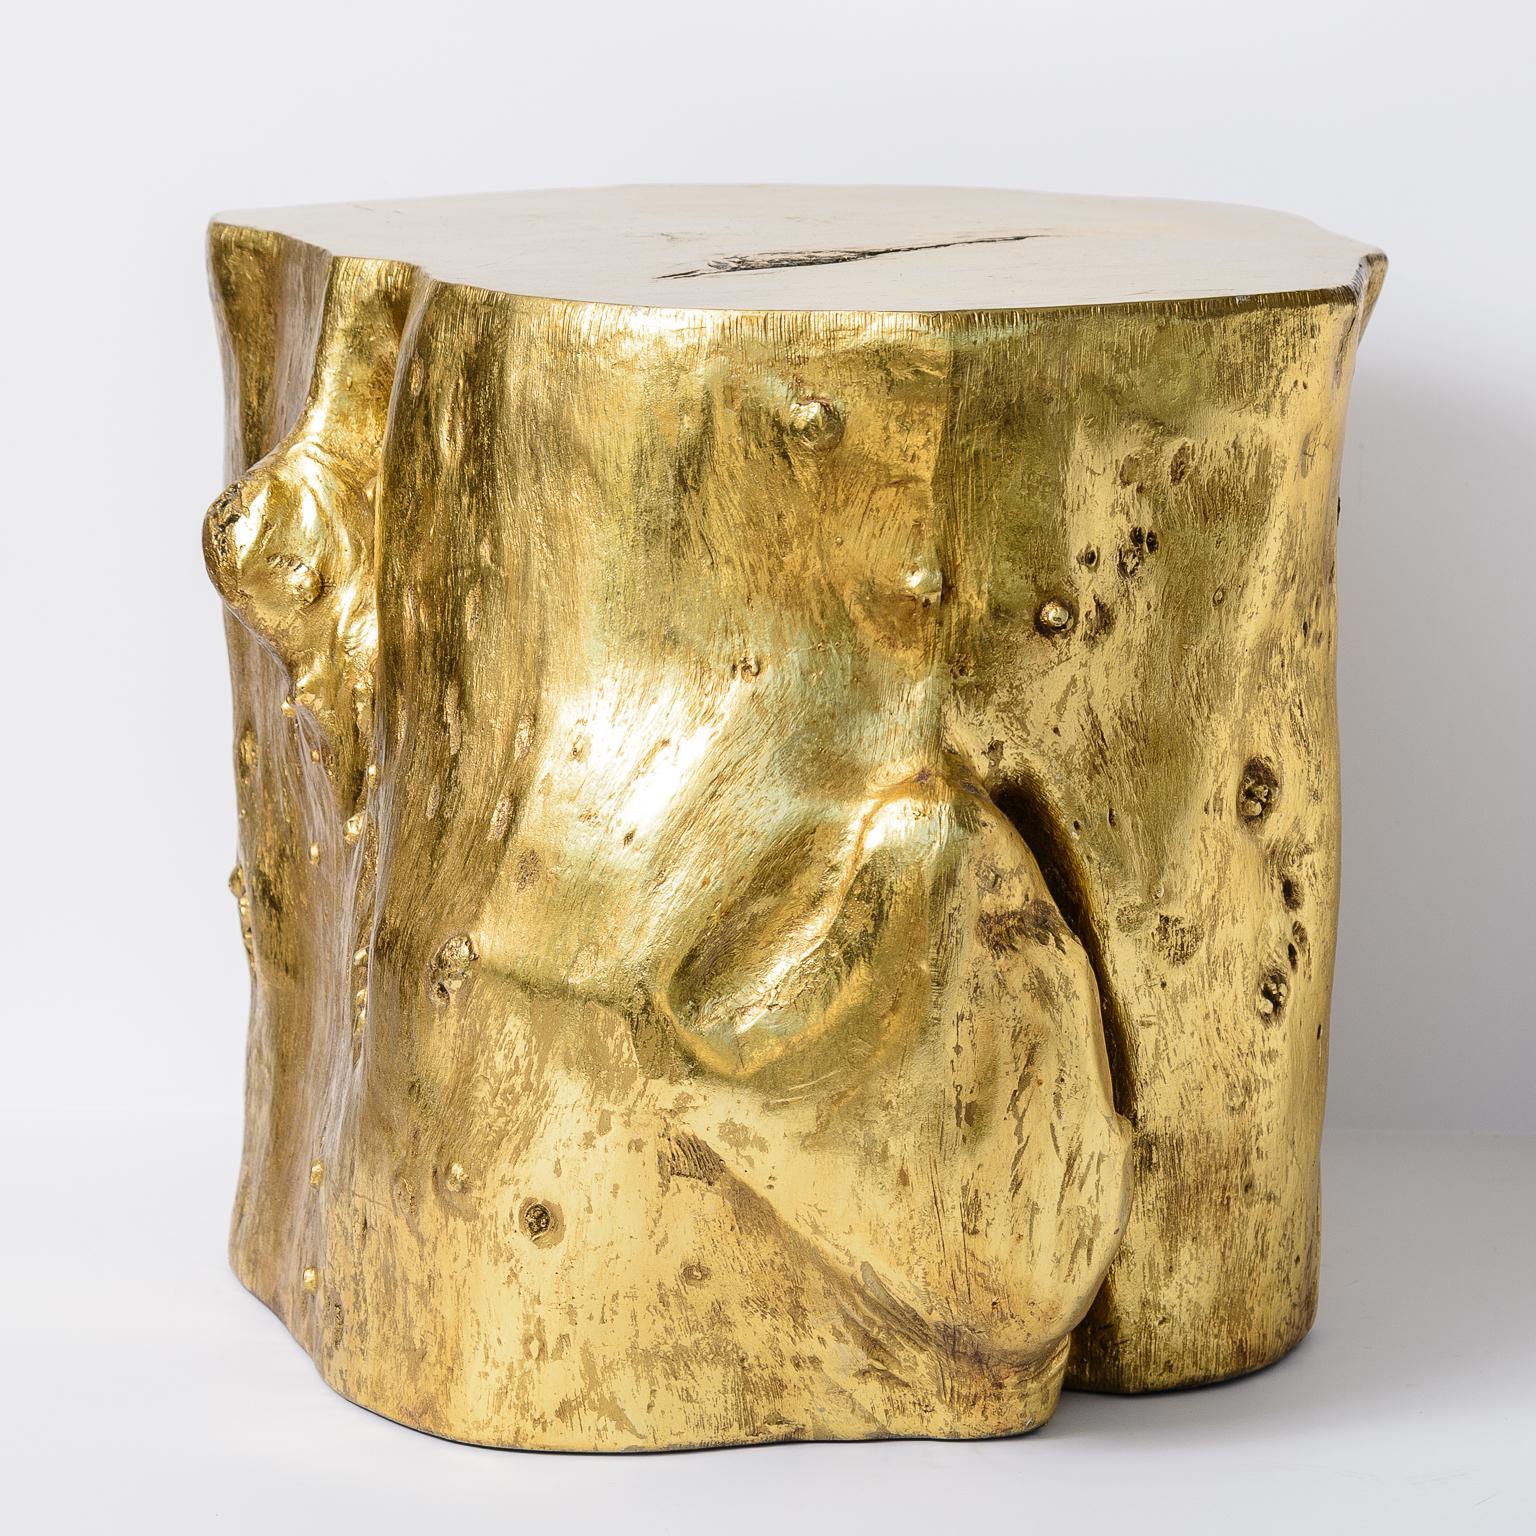 Set of 2 Vintage Gold Leaf Cast Resin Tree Stump Stools, Side Tables In Good Condition For Sale In West Palm Beach, FL